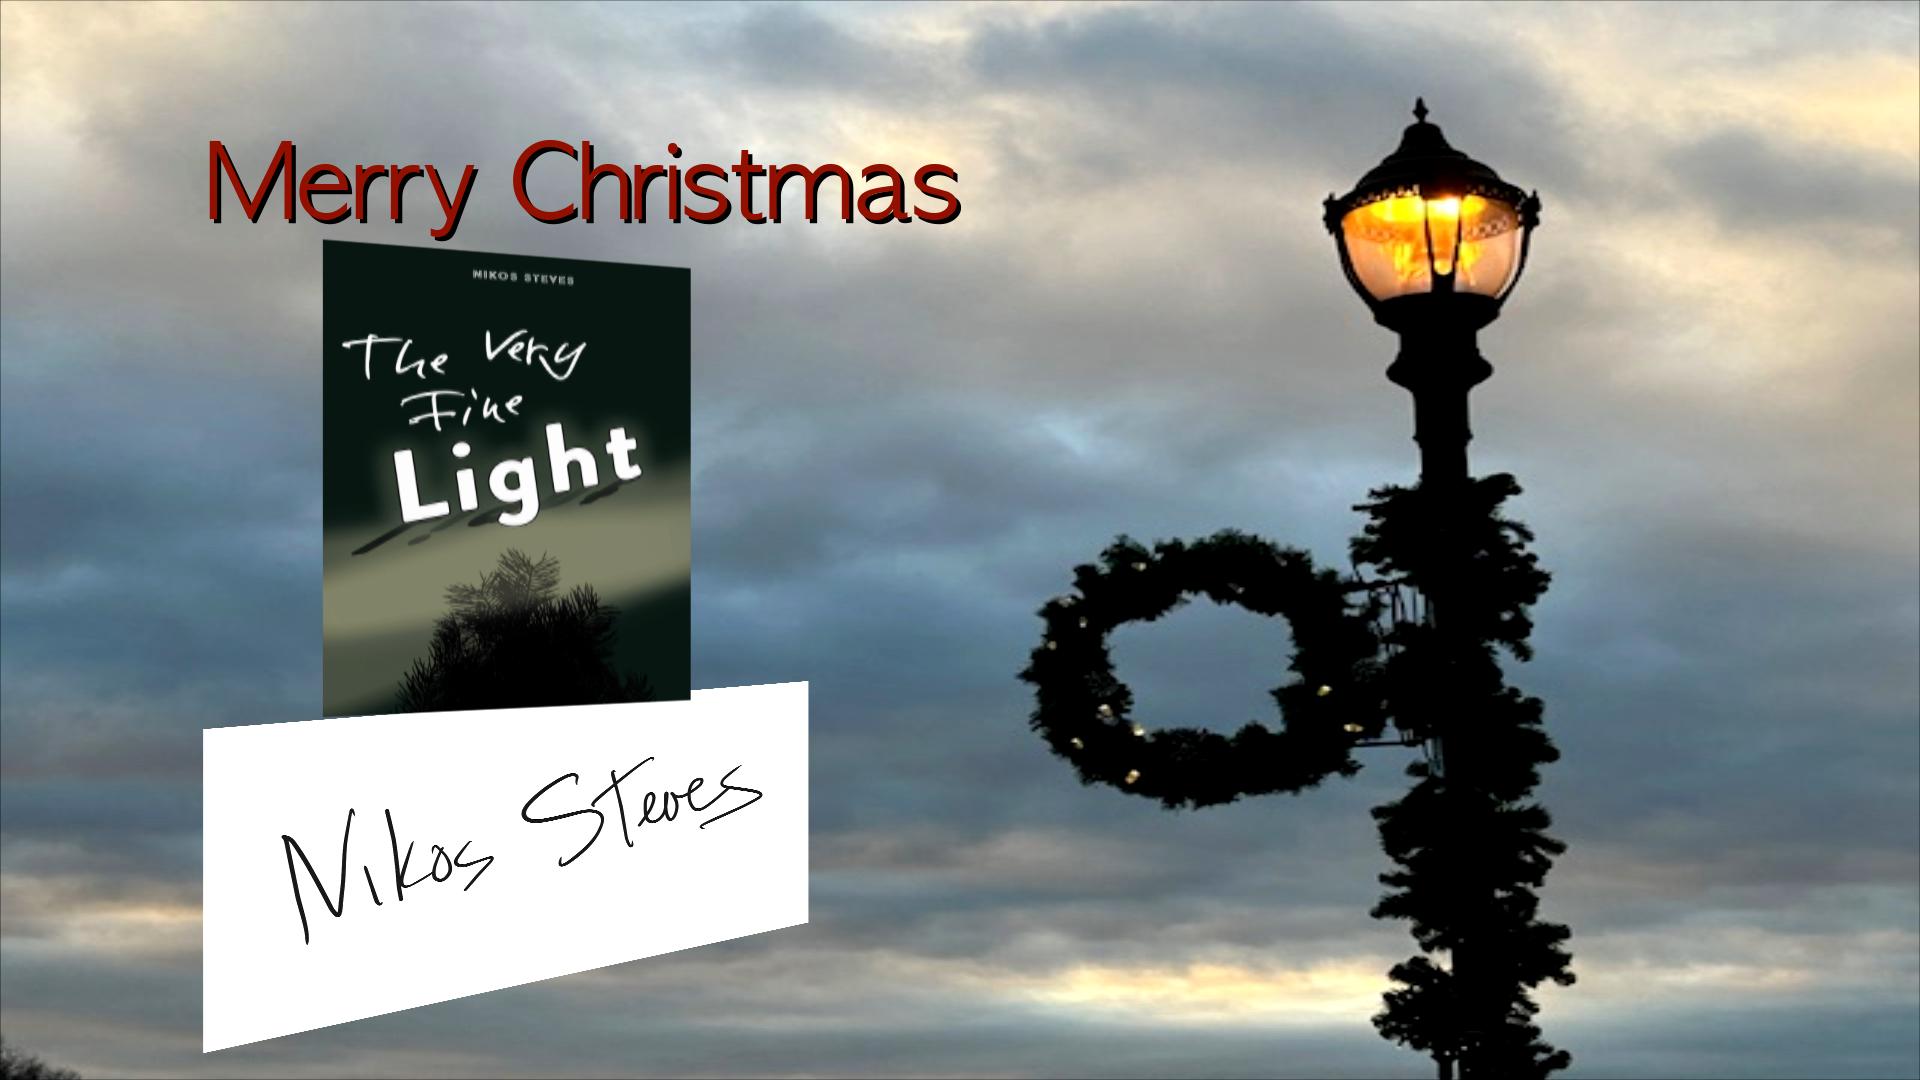 Infographic with the words Merry Christmas followed by the cover of my book "The Very Fine Light" and my signature "NIkos Steves" over an image of a cloudy sky with a lamppost decorated for Christmas with a green wreath.